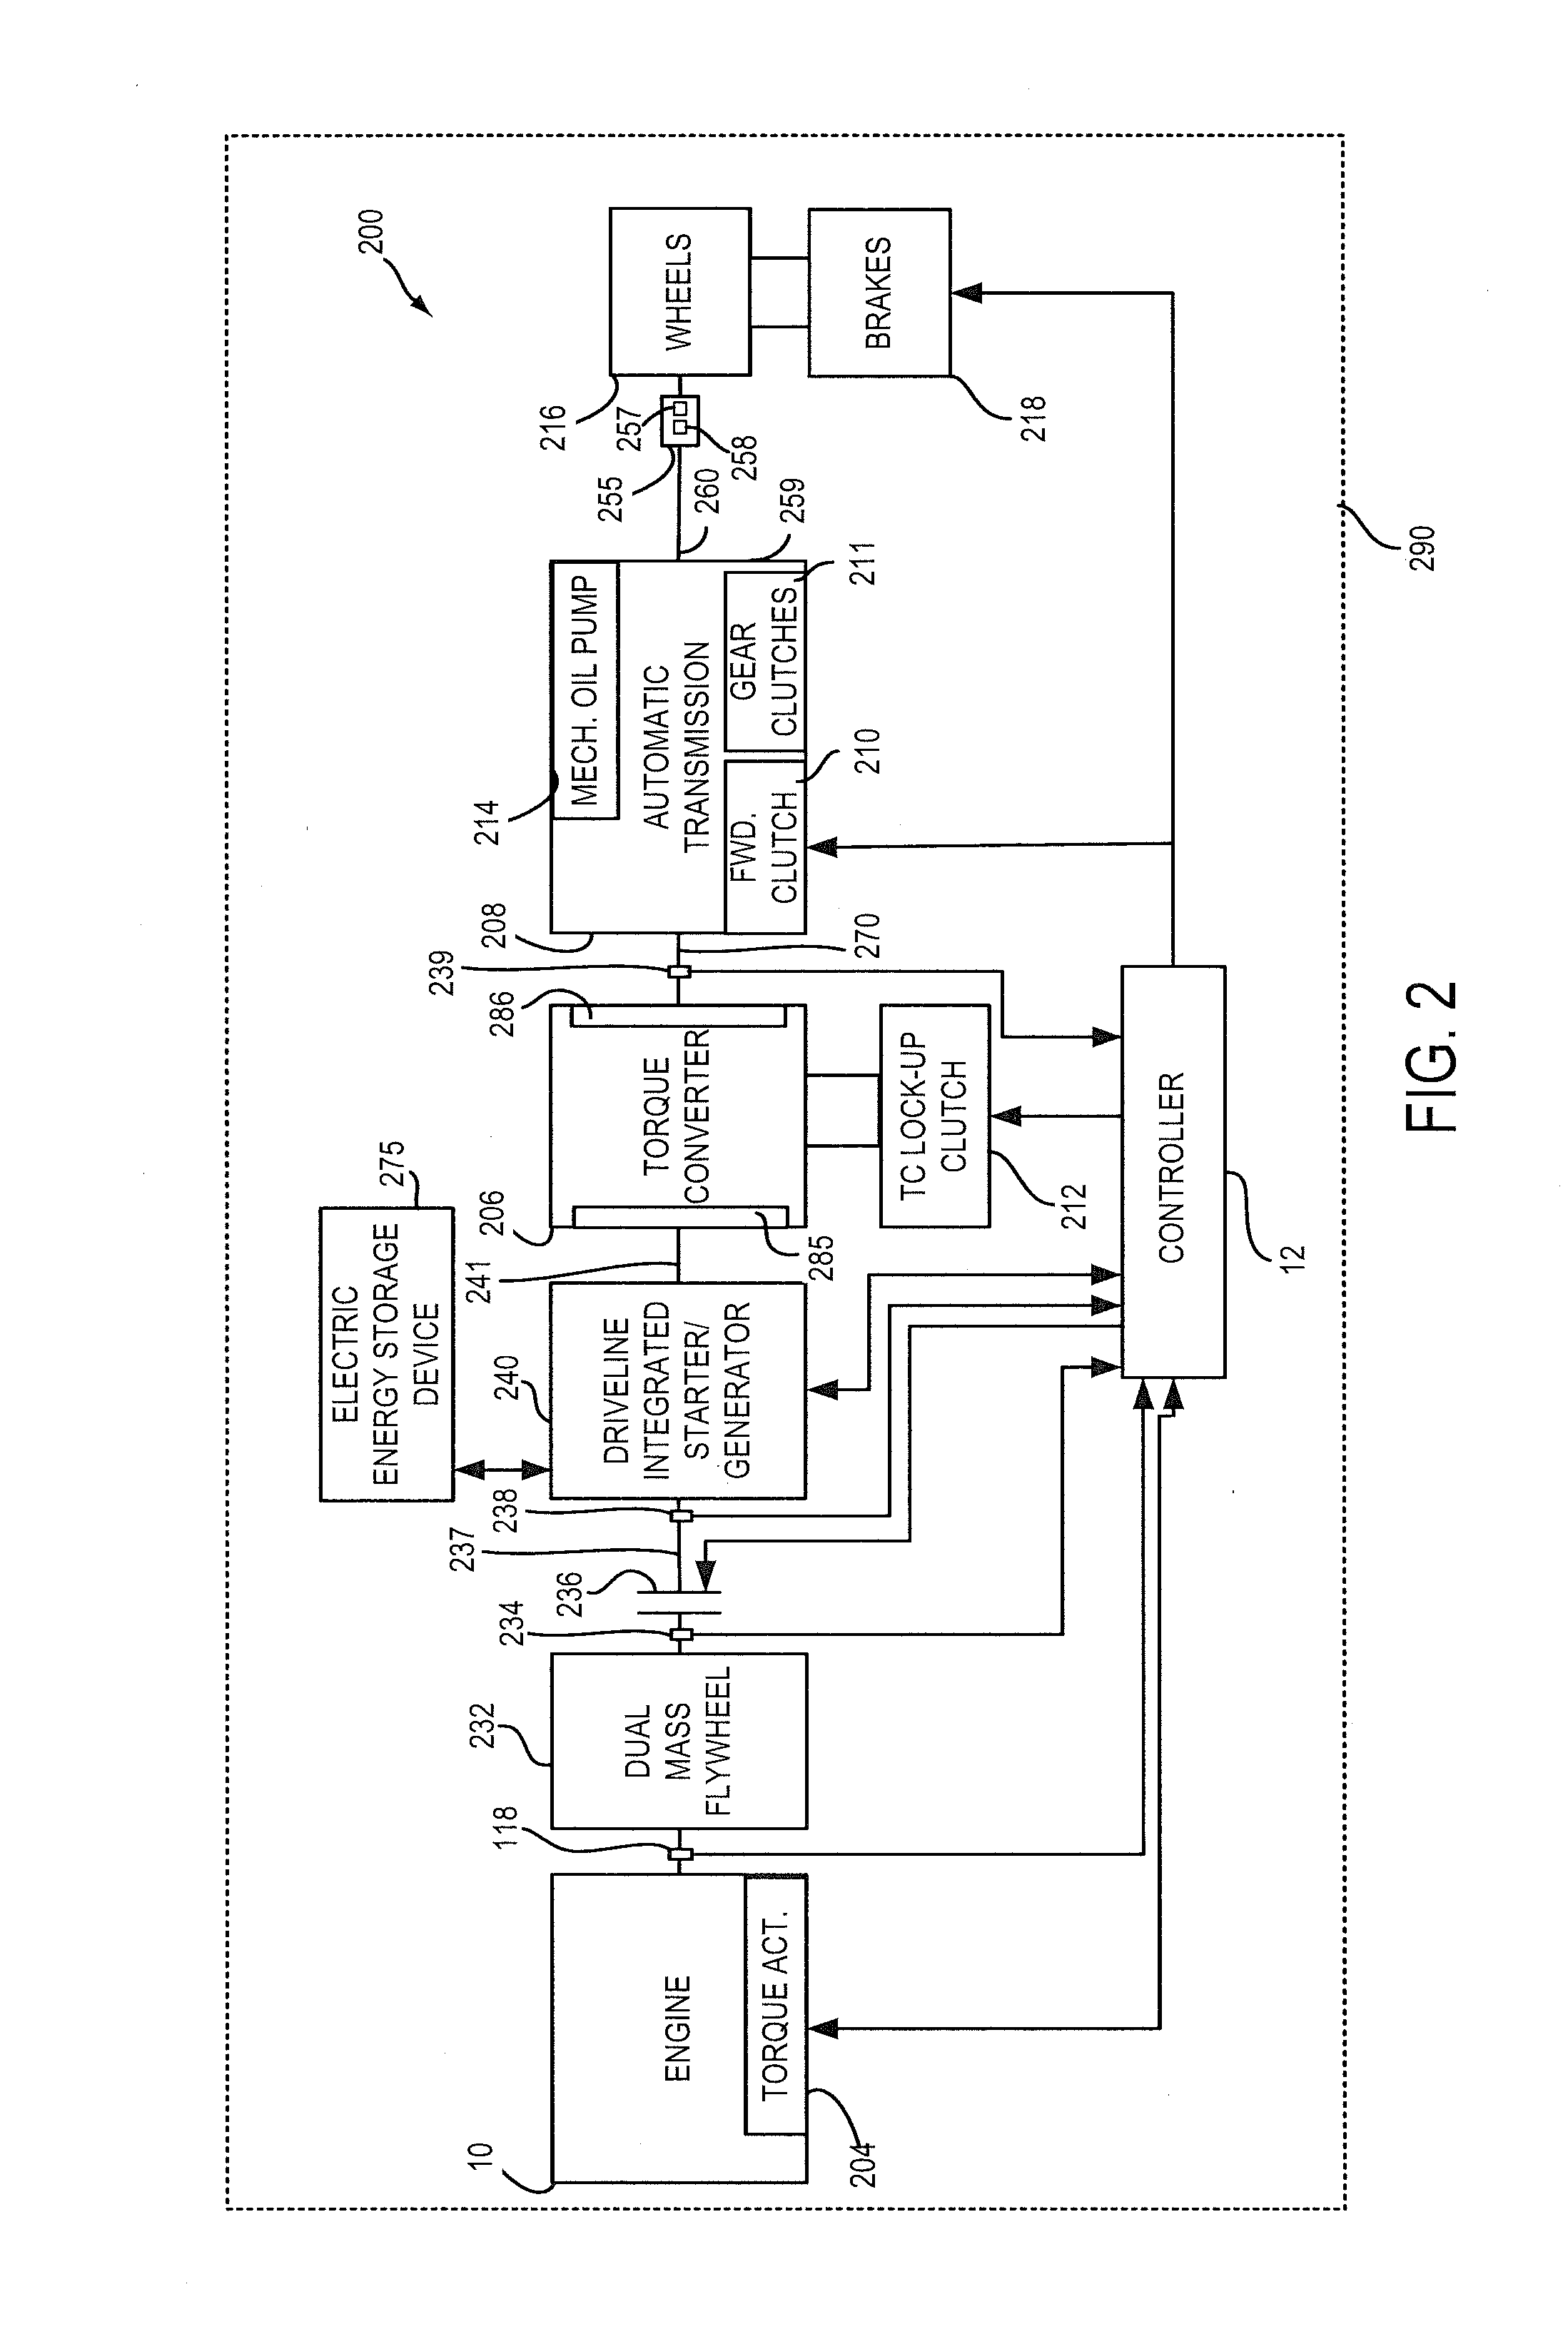 Method and system for torque control